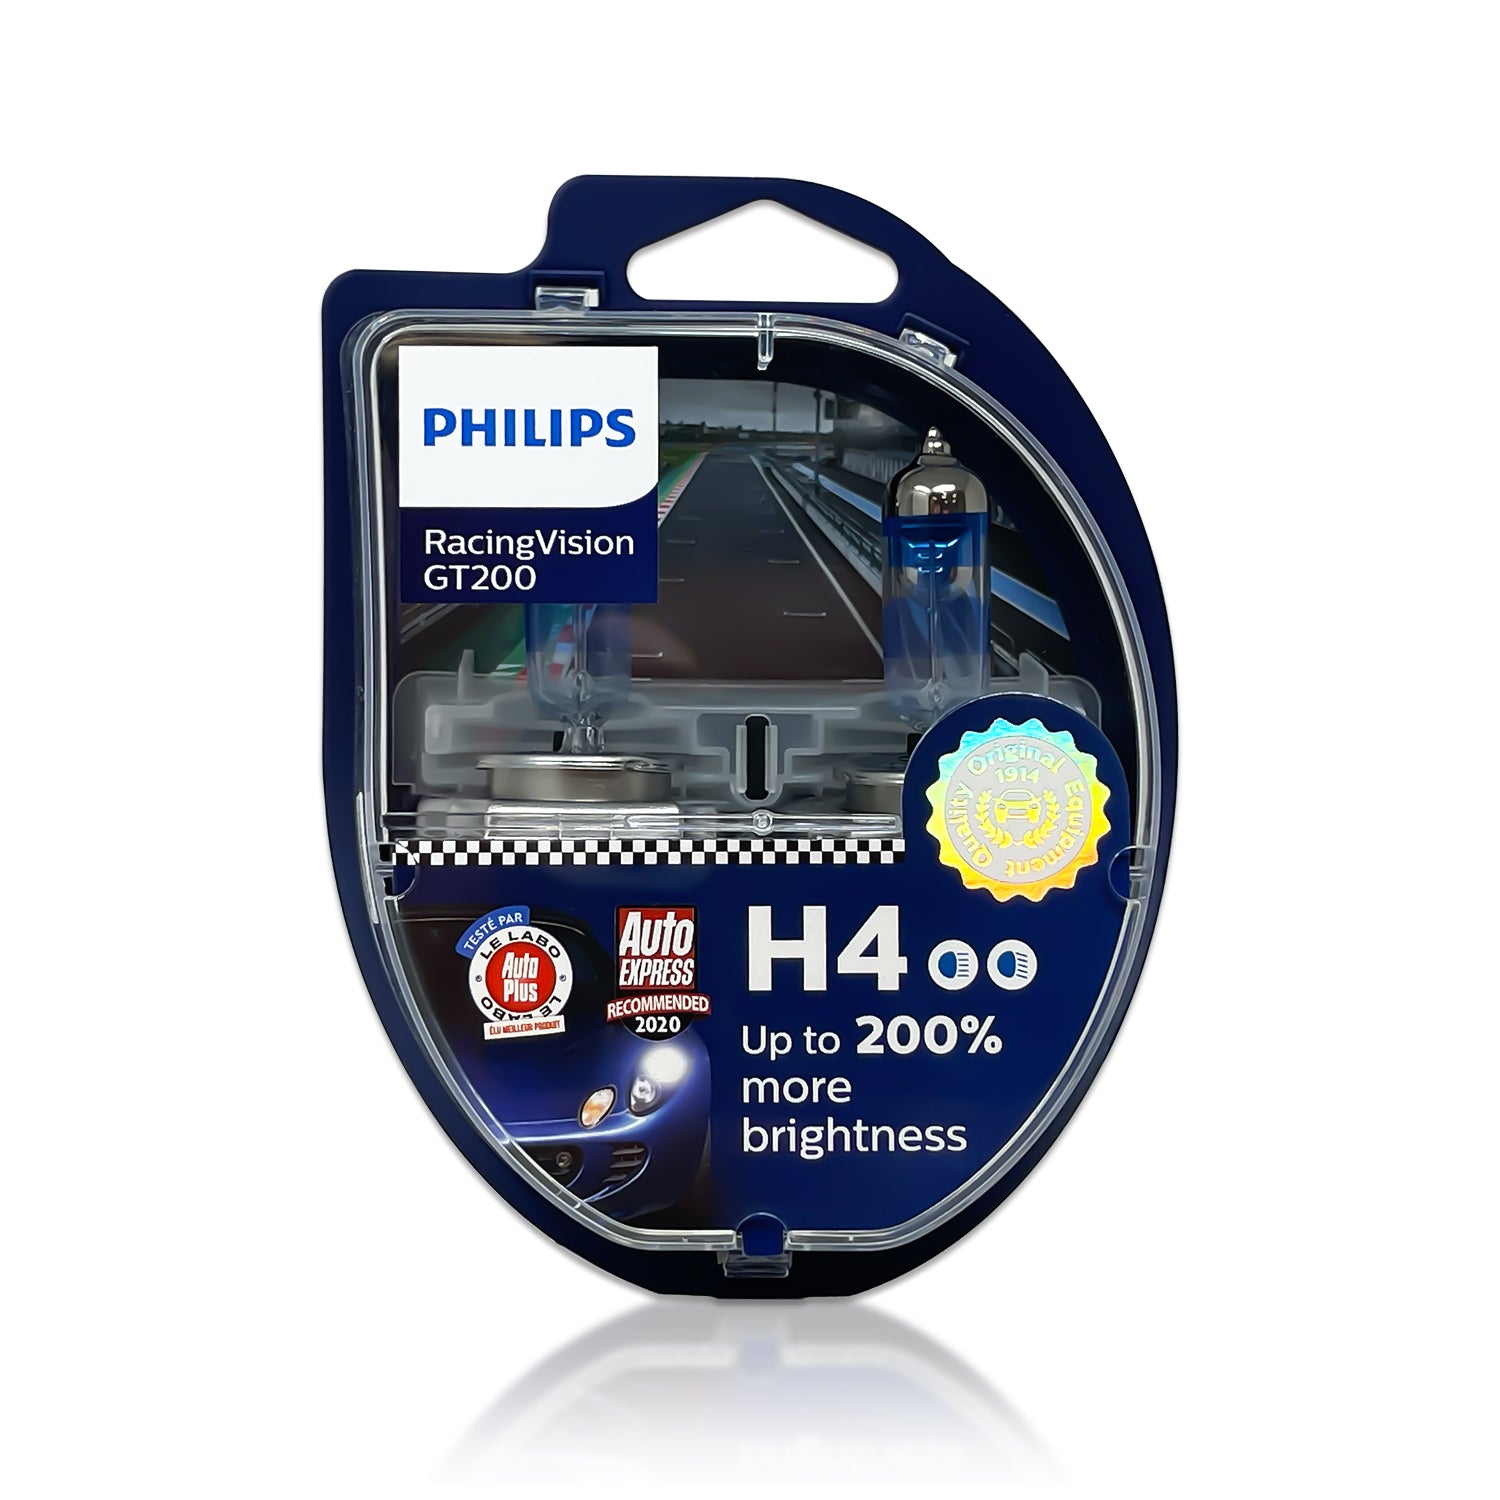 Shop Philips Racing Vision H4 online